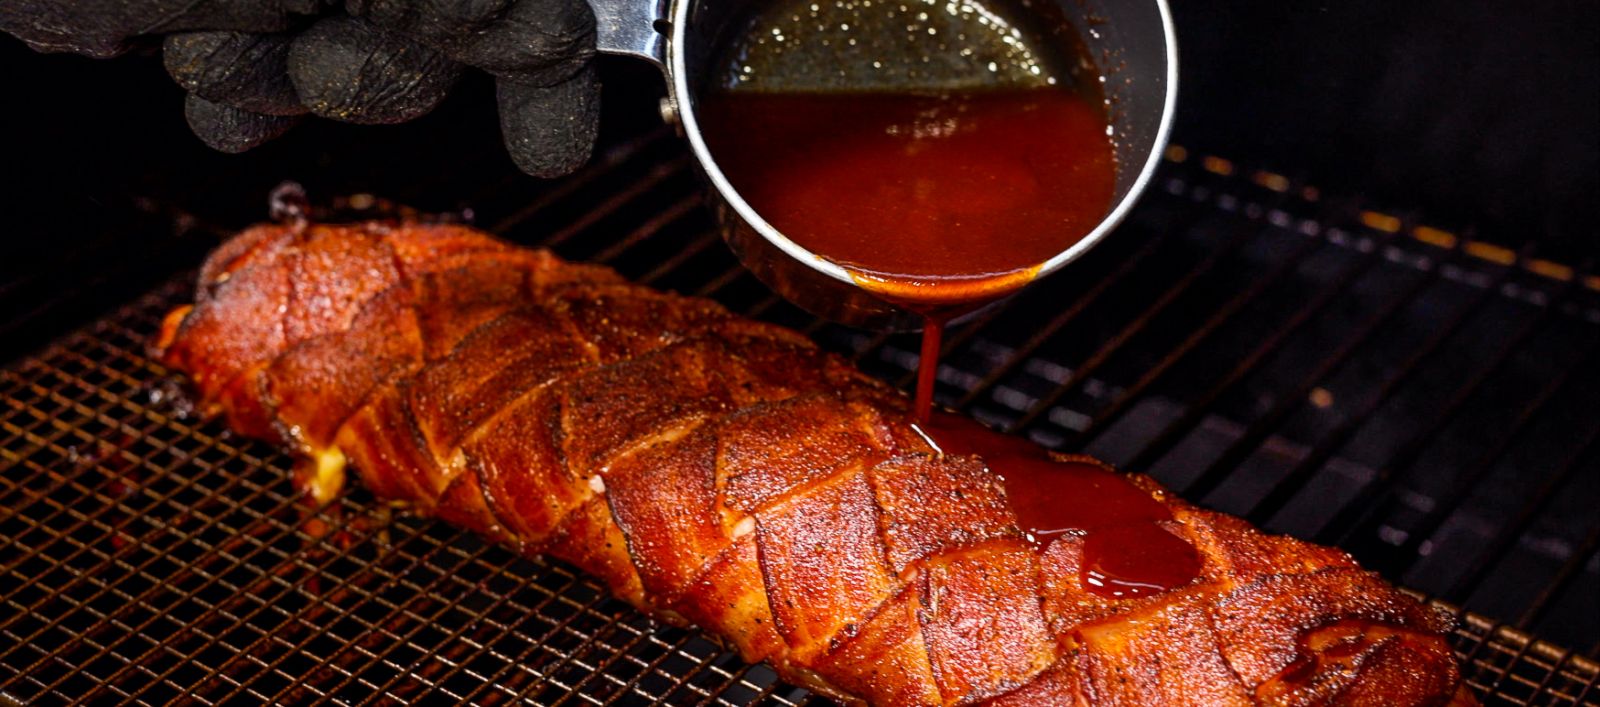 This image shows a bacon chicken fatty drizzled with glaze